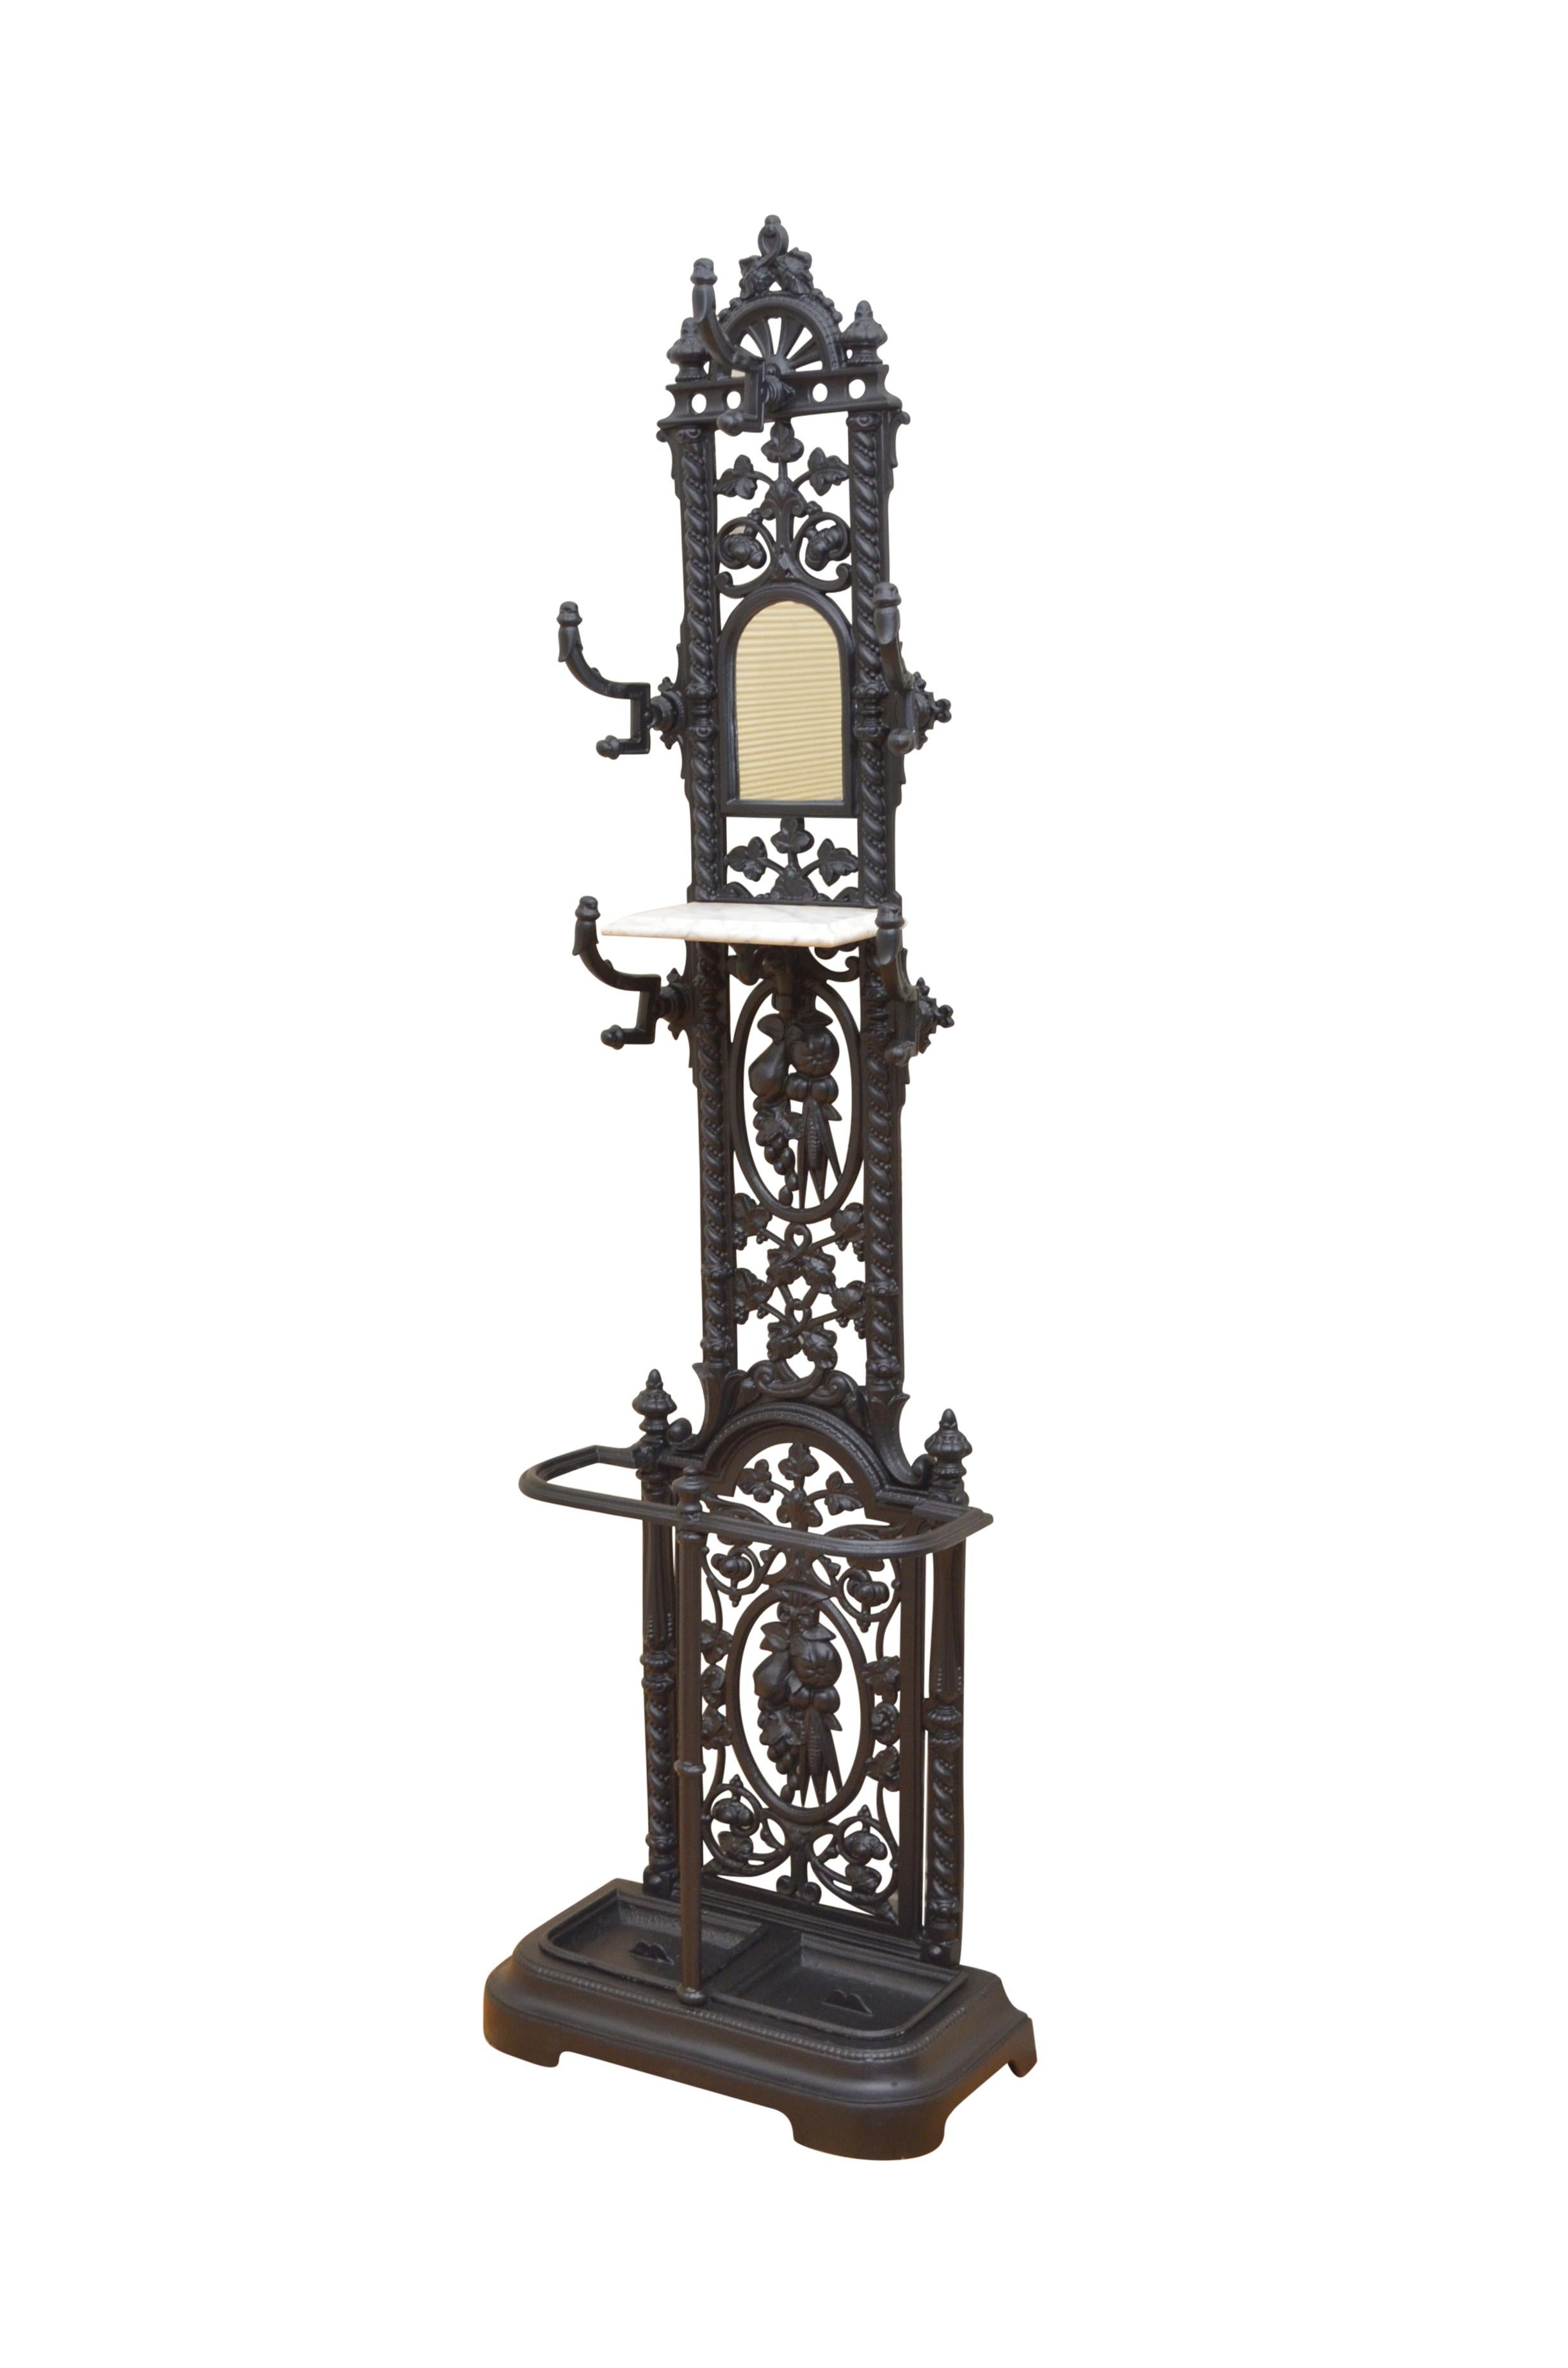 K0412 / K0386 Matched pair of Victorian cast iron hall stands, each with arched mirror to back and 5 coat hooks with marble shelf, over umbrella holder all with fruit and floral decoration throughout. This cast iron coat stand is in excellent